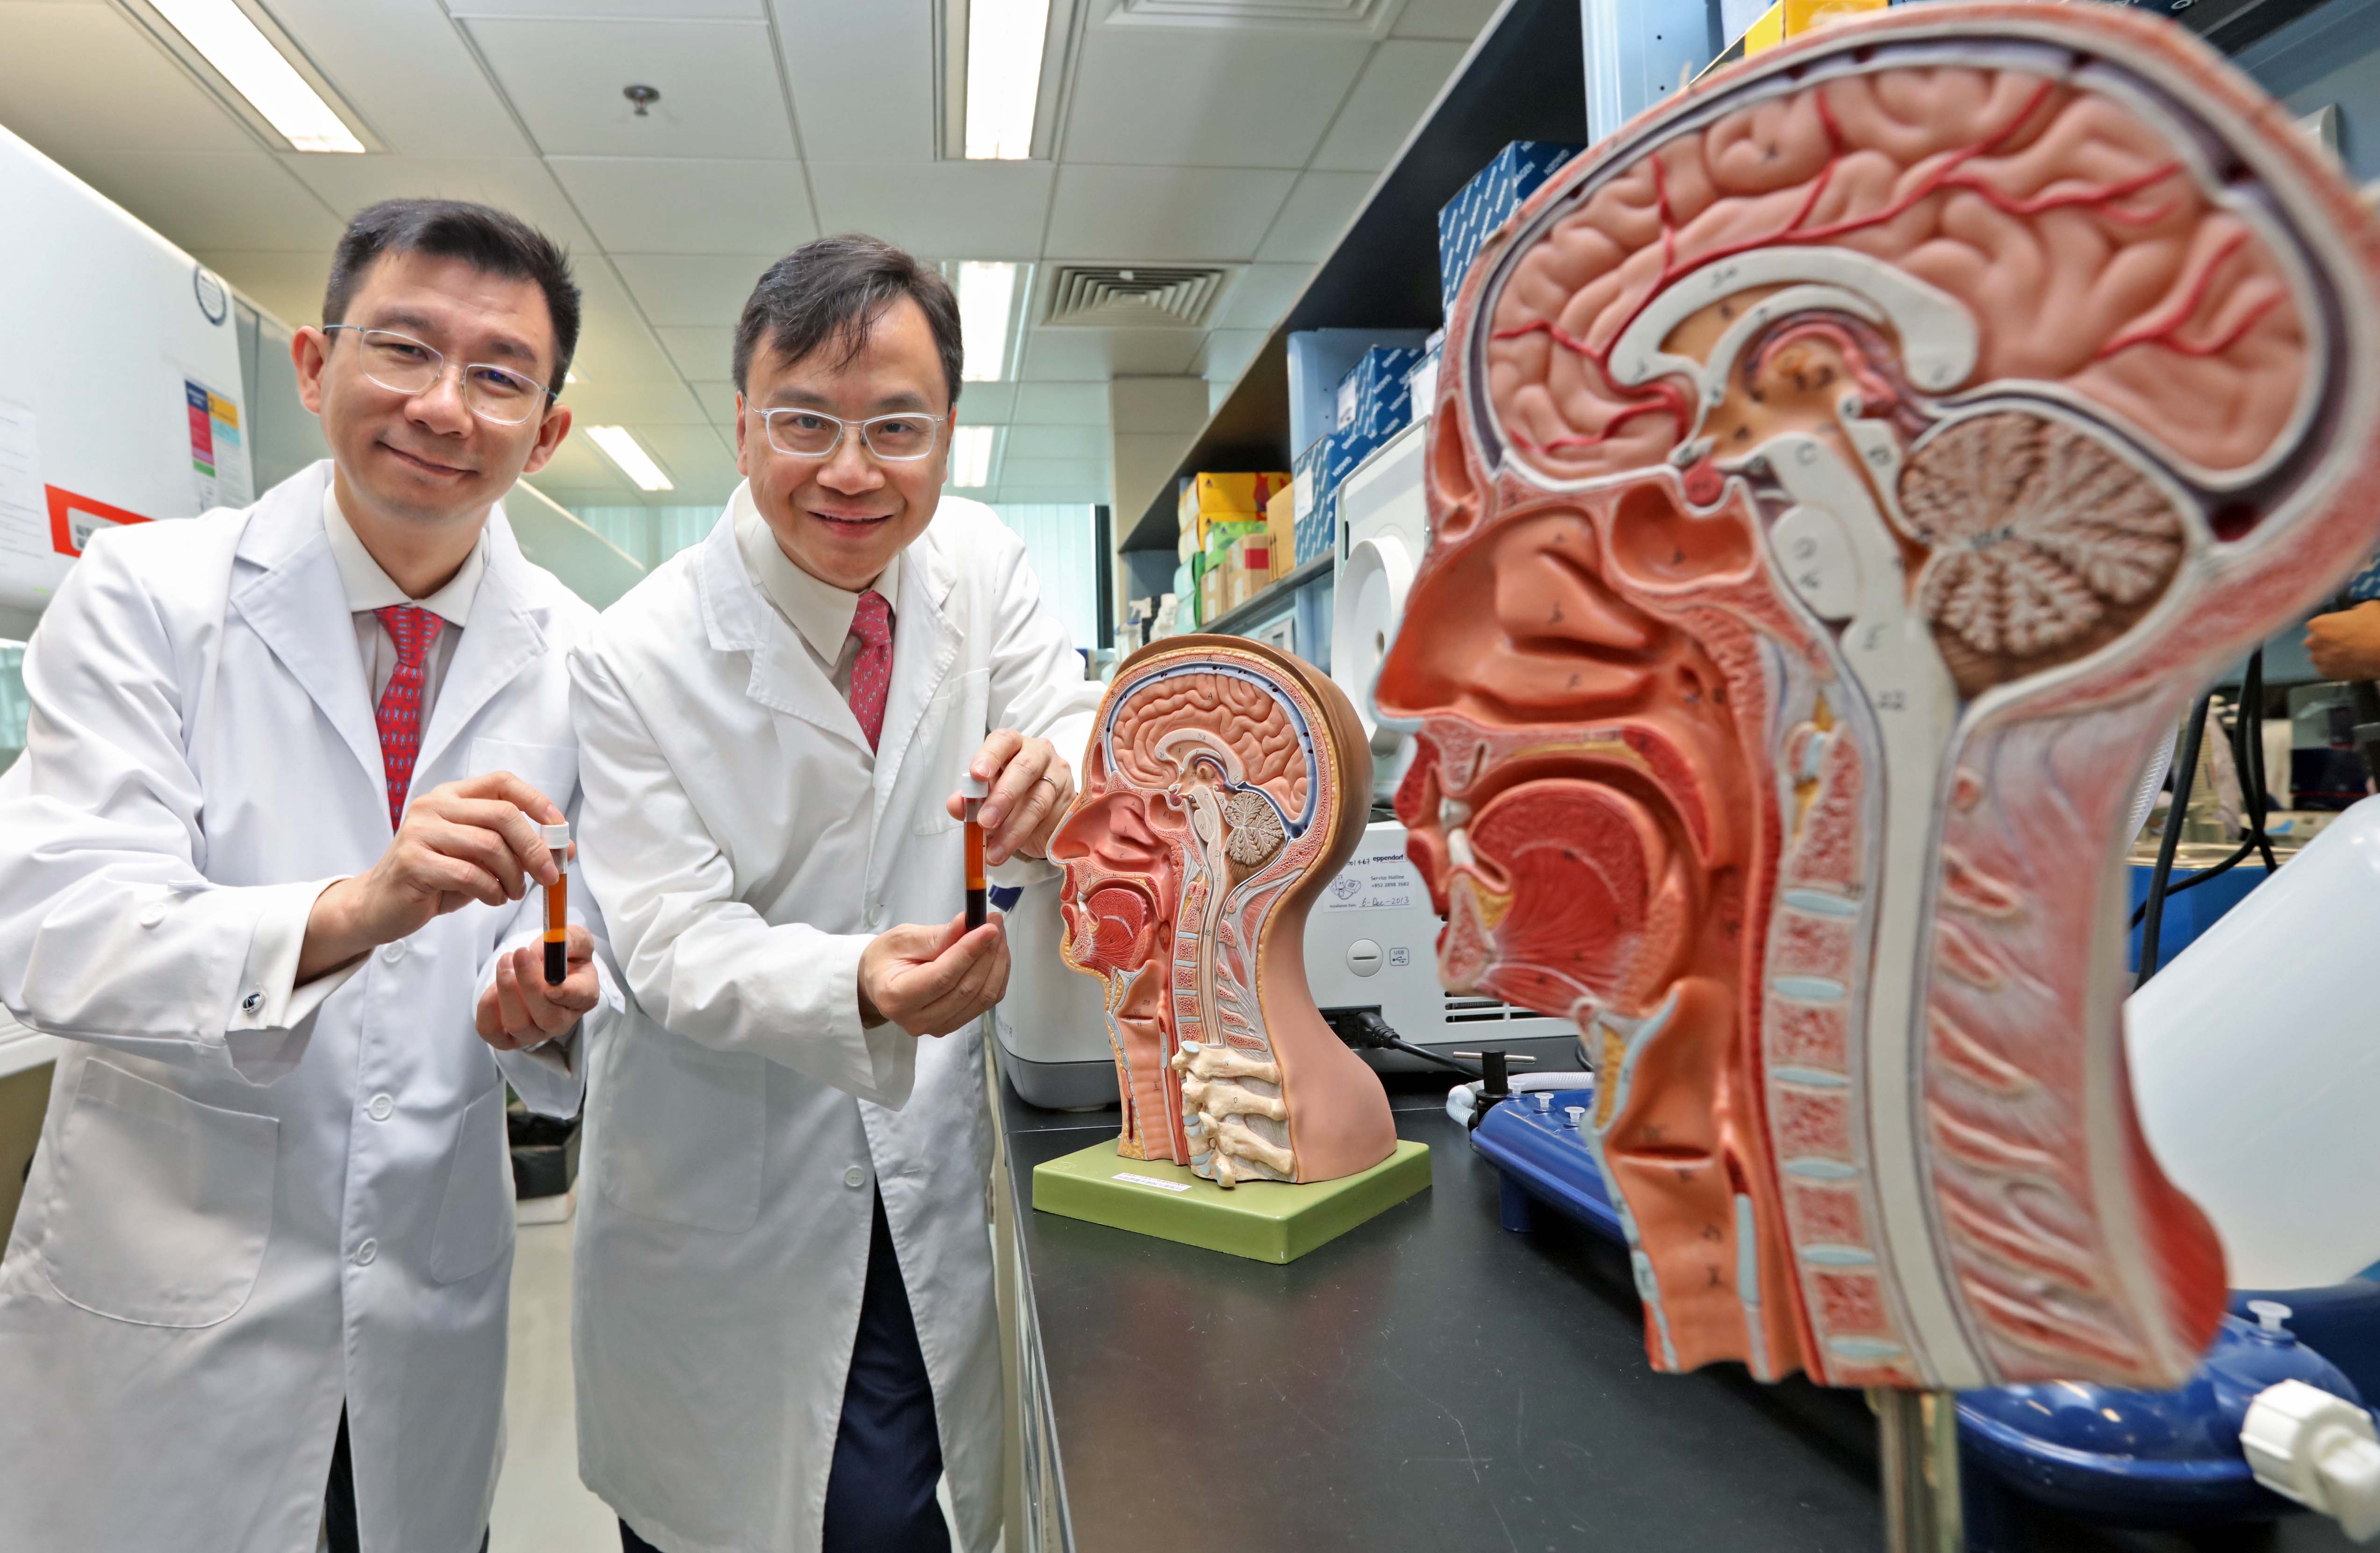 The Chinese University of Hong Kong (CUHK) recently completed a 20,000-person study and confirms that plasma Epstein-Barr virus (EBV) DNA analysis is useful for screening early asymptomatic nasopharyngeal carcinoma (NPC). The findings have just been released in the New England Journal of Medicine. Featured are (right) Professor Dennis LO, Director of the Li Ka Shing Institute of Health Sciences at CUHK, and Professor Allen CHAN from the Department of Chemical Pathology, Faculty of Medicine at CUHK.